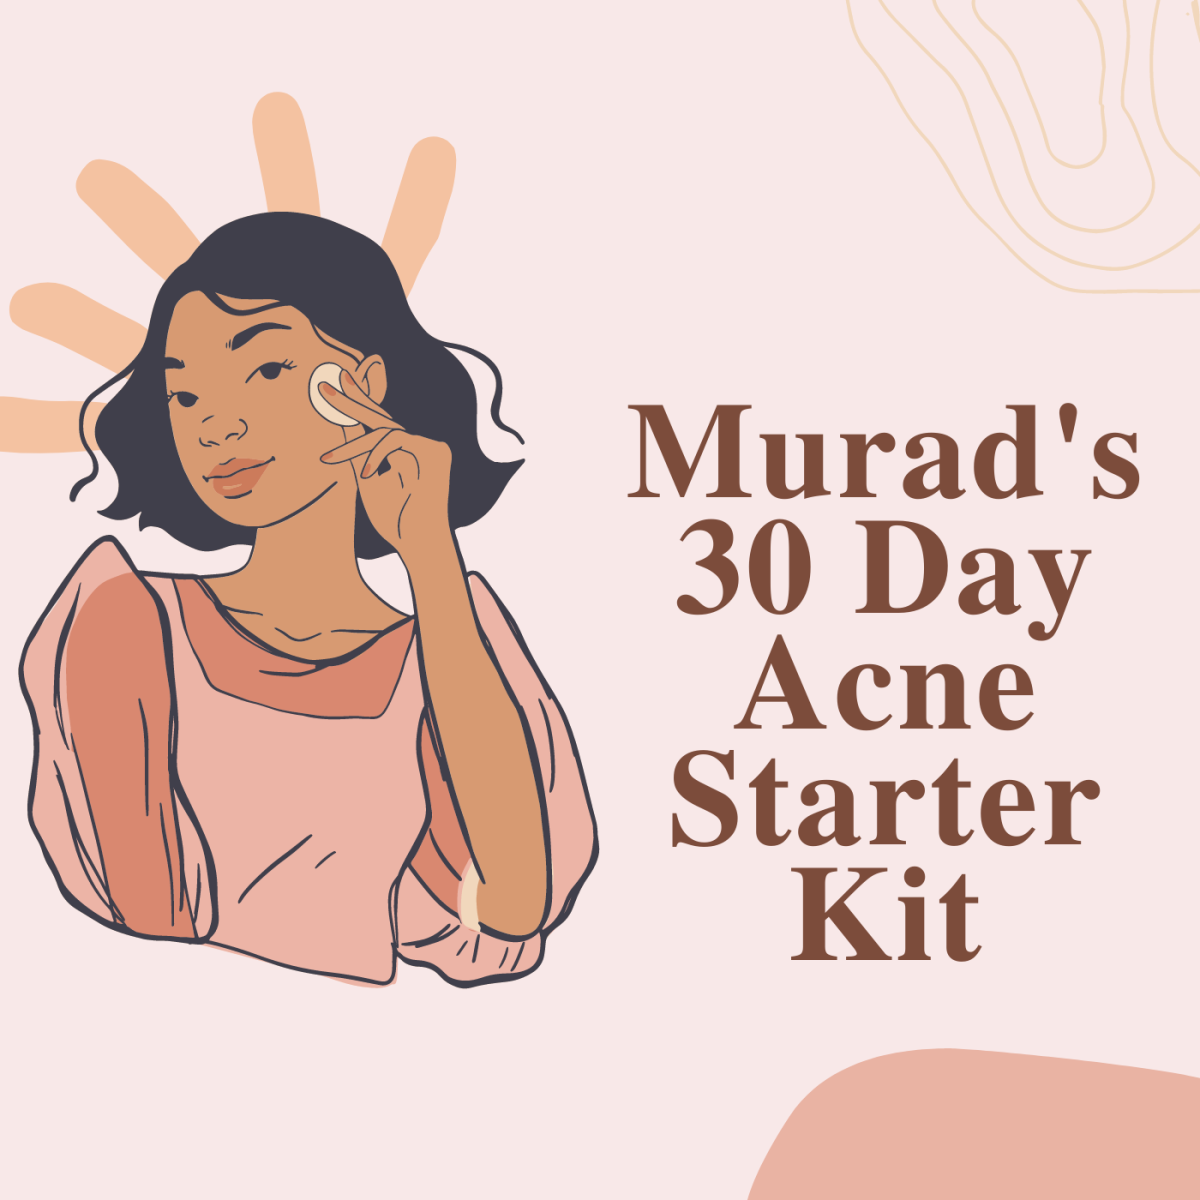 60 Day Challenge: Review of Murad's 30 Day Acne Starter Kit and Complete Acne Control Kit